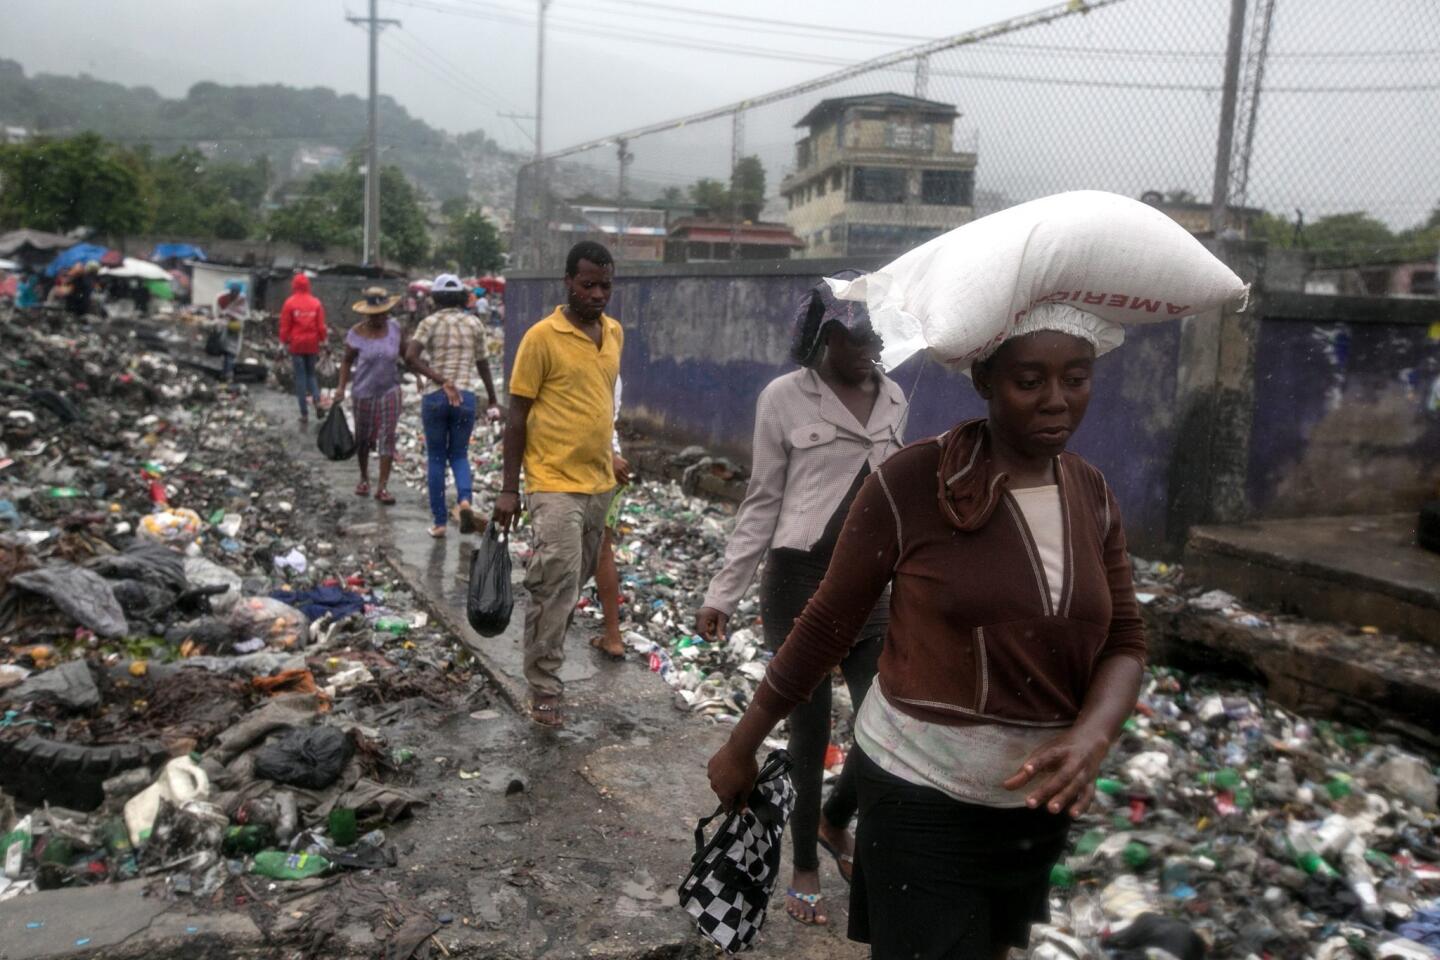 Residents walk through a garbag-filled street in Port-au-Prince, Haiti, on Oct. 4, 2016.